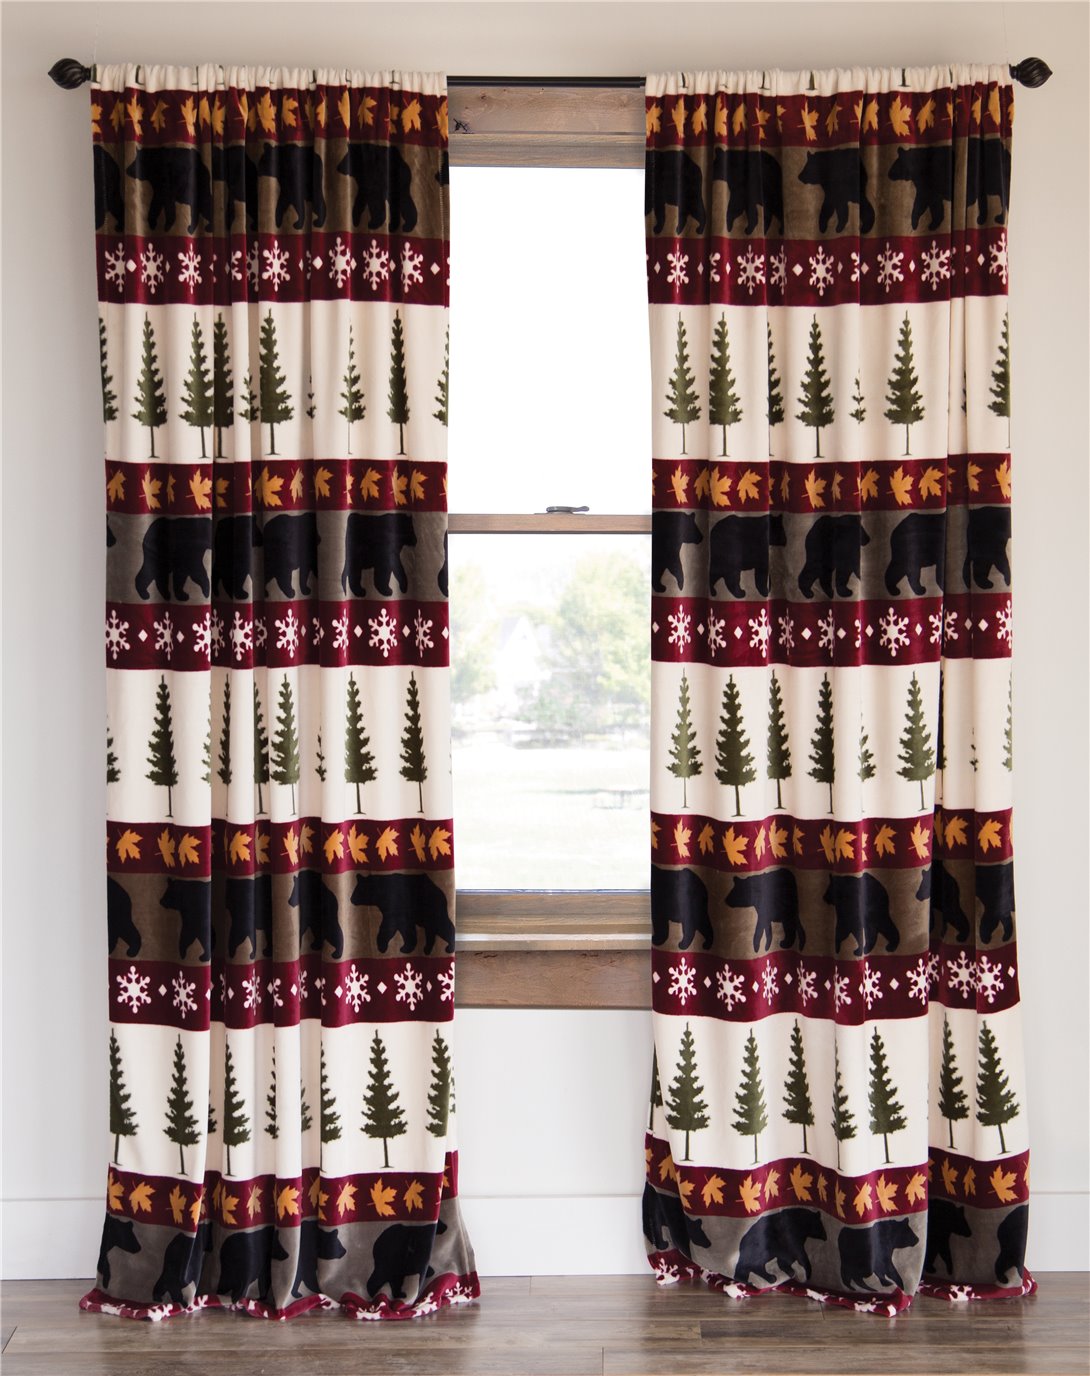 Carstens Tall Pines Rustic Cabin Curtain Panels (Set of 2)